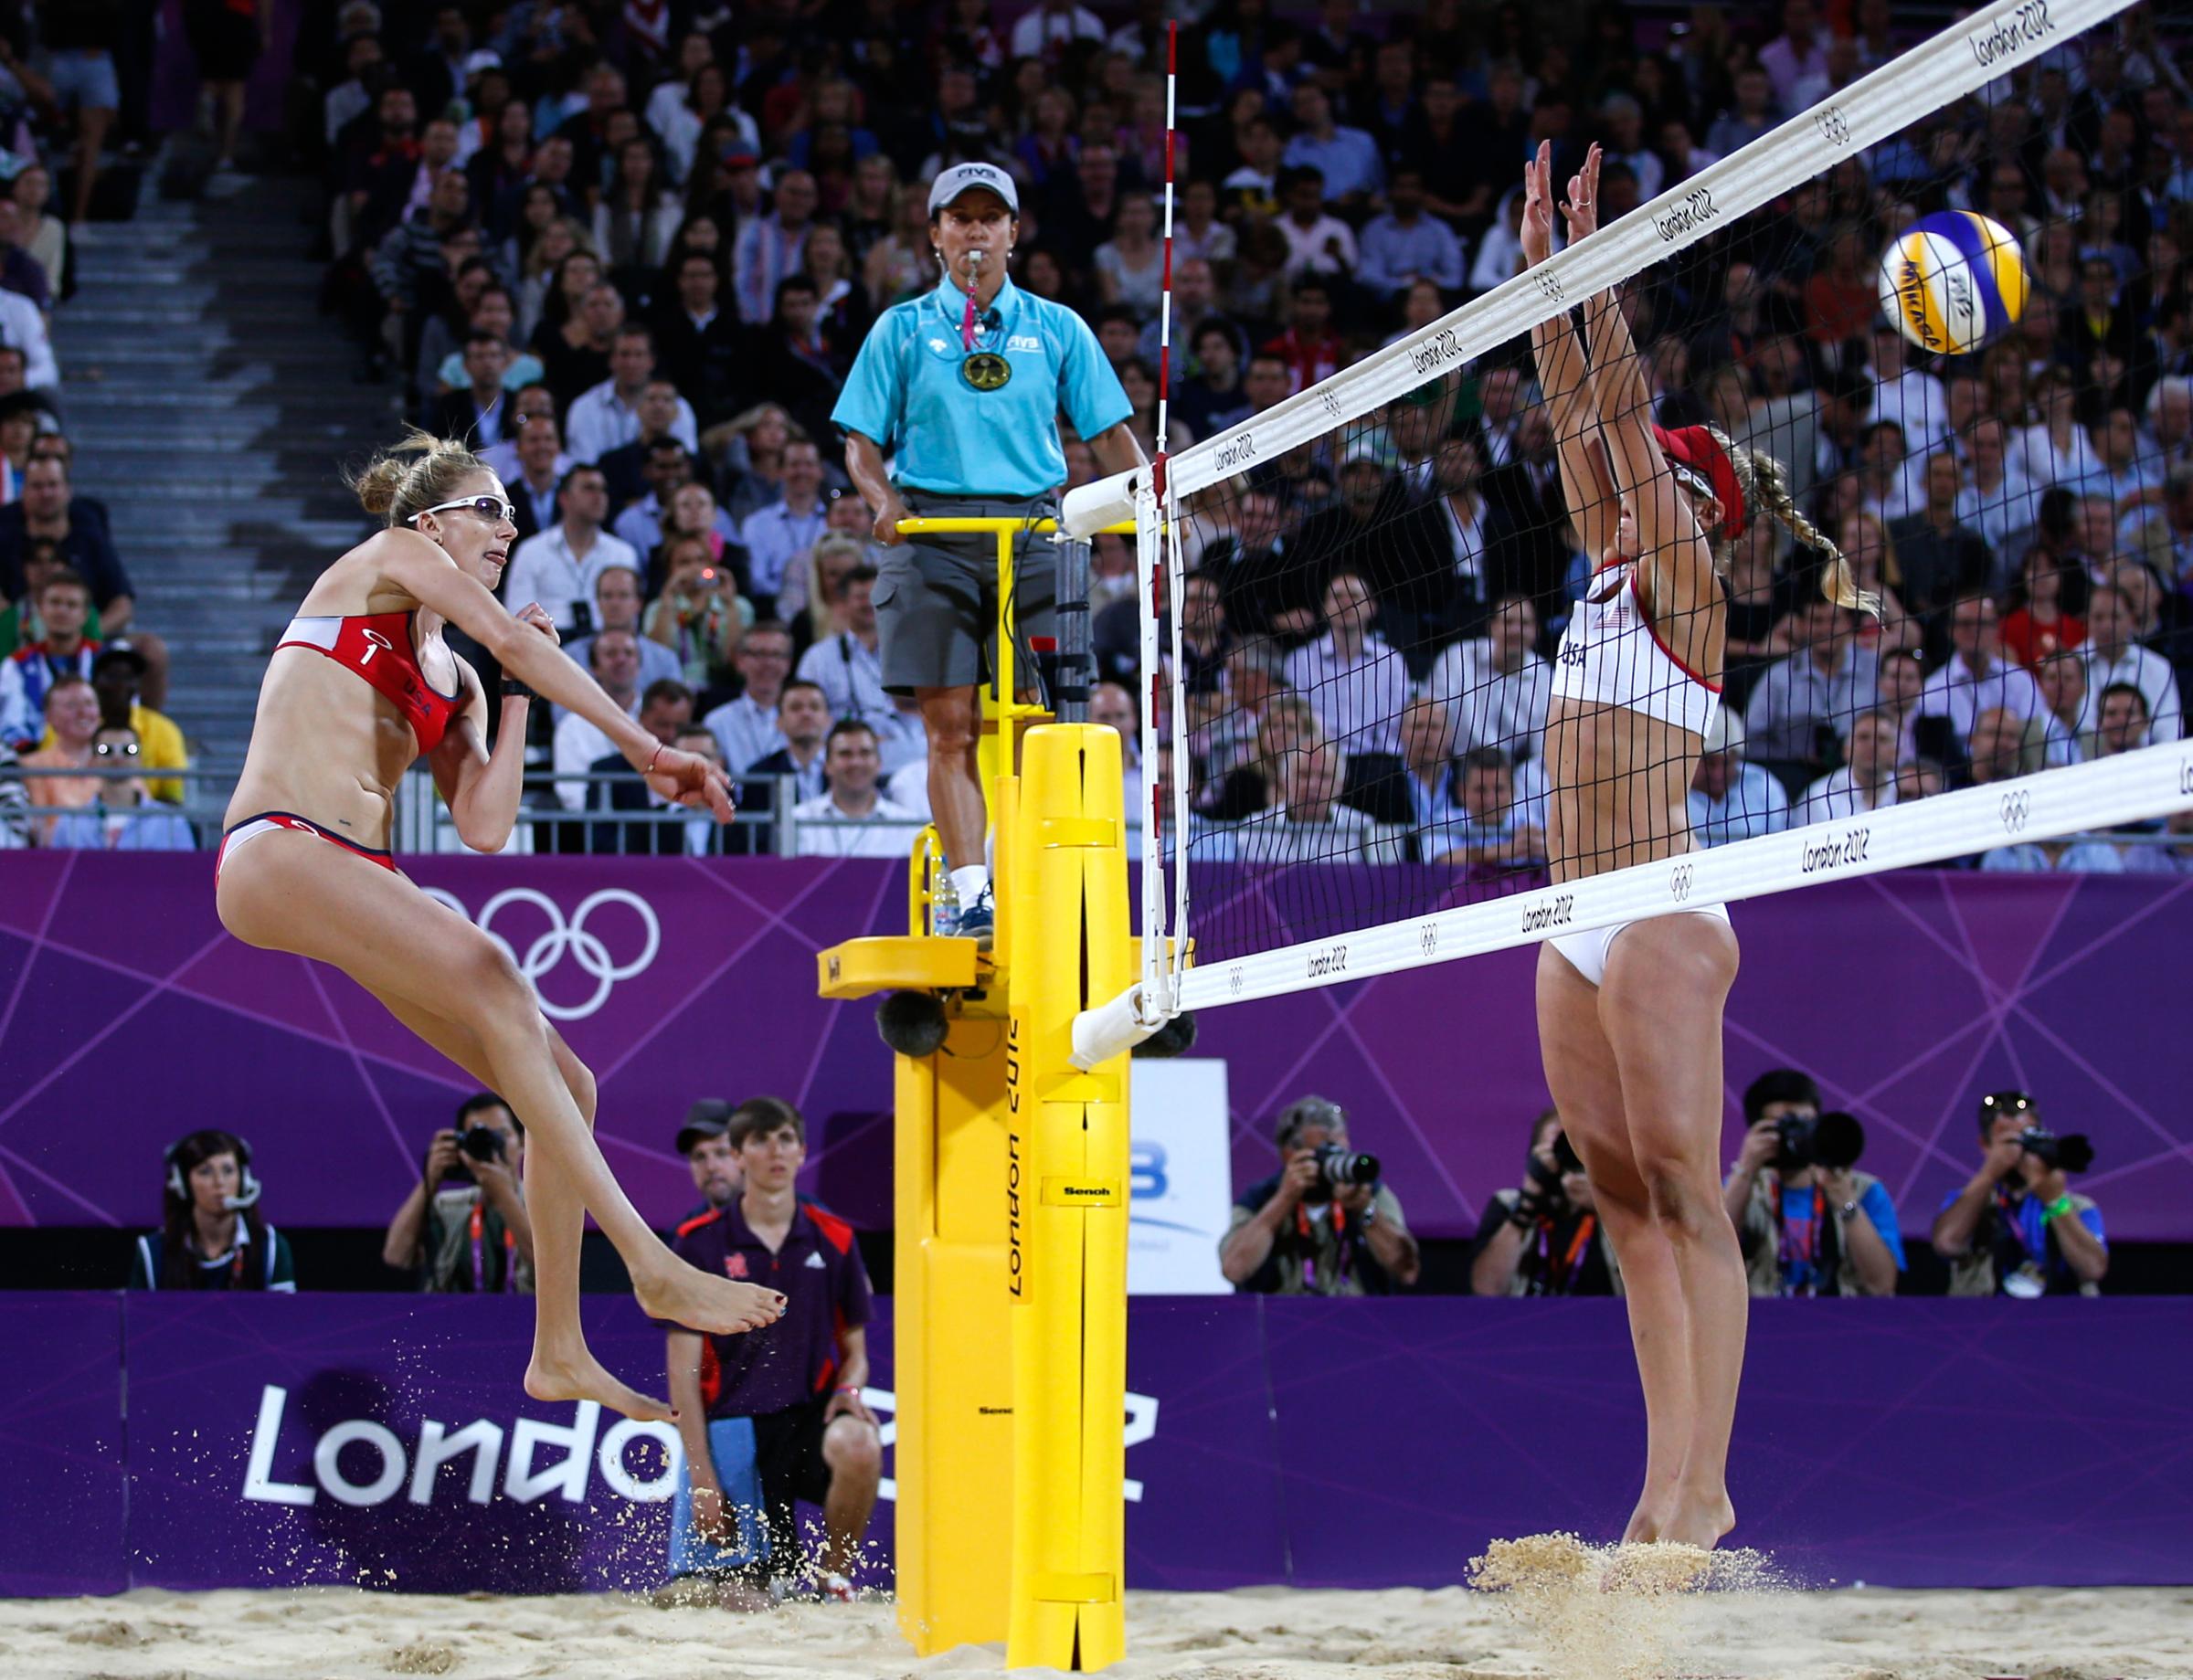 Kerri Walsh Jennings of the U.S. spikes the ball past April Ross of the U.S. at the women's beach volleyball gold medal match at the Horse Guards Parade